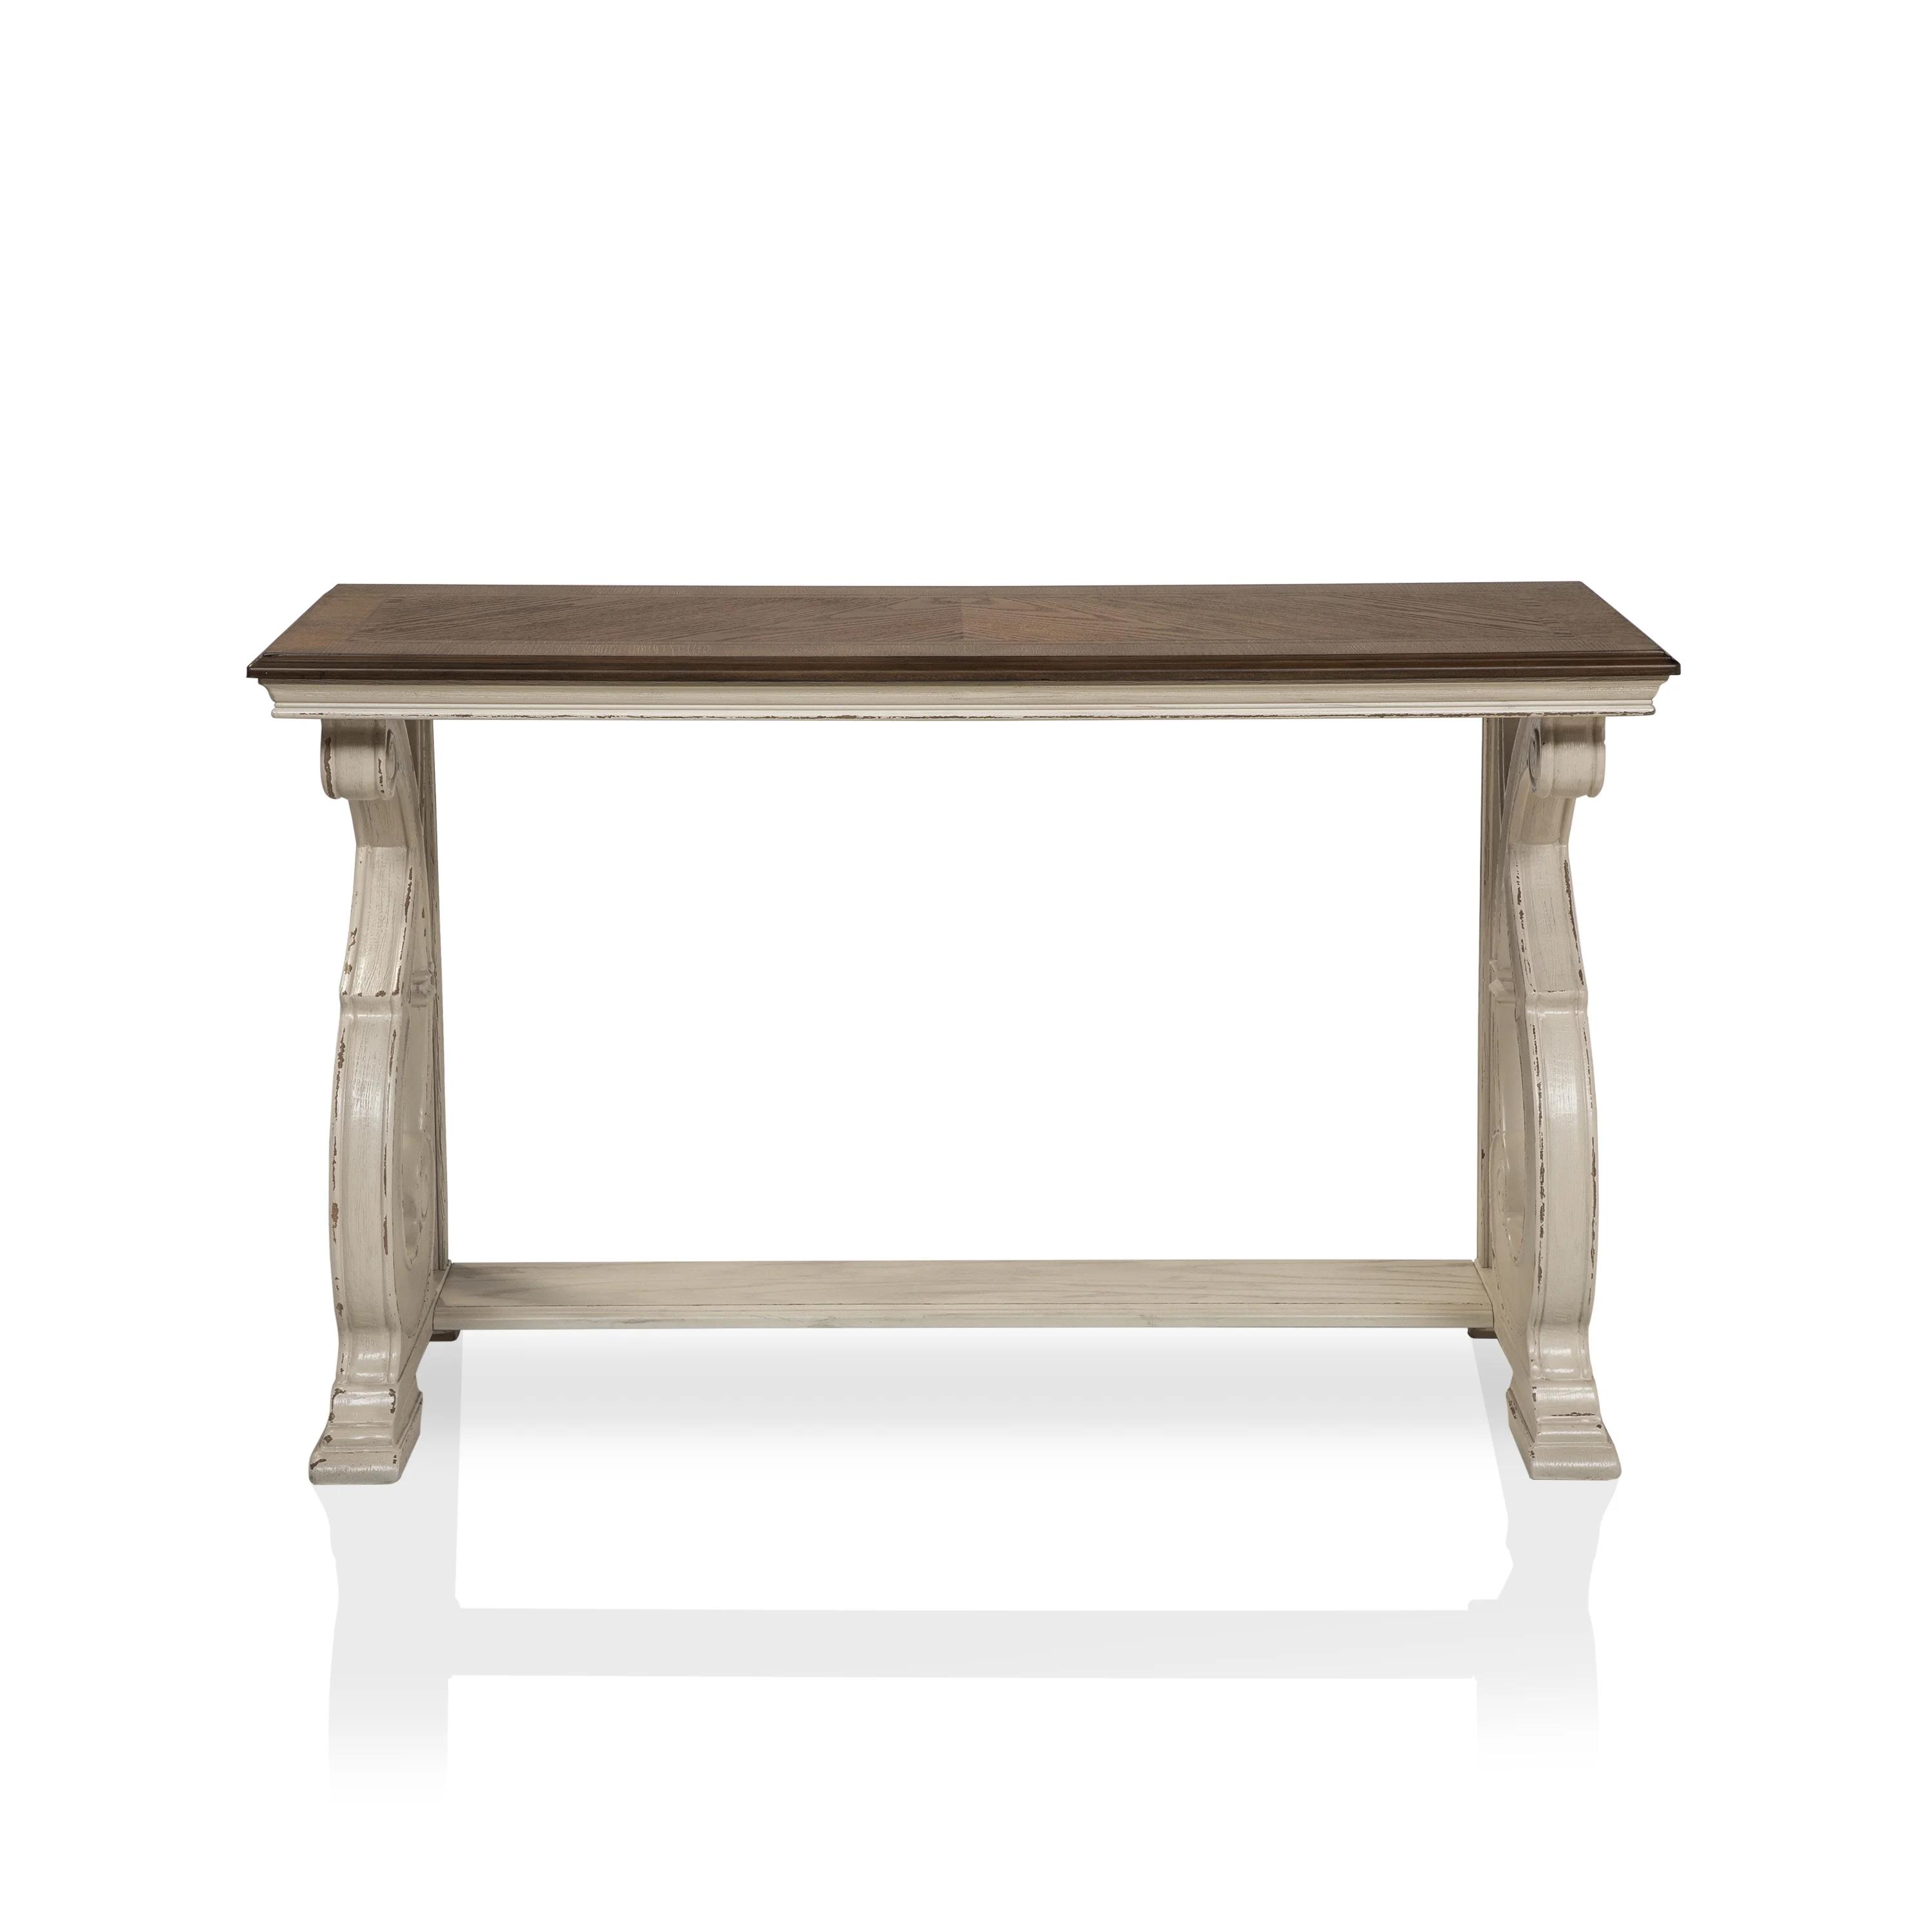 Classic, Traditional Sofa Table Clementine 4148-05 in Oak, Antique White 